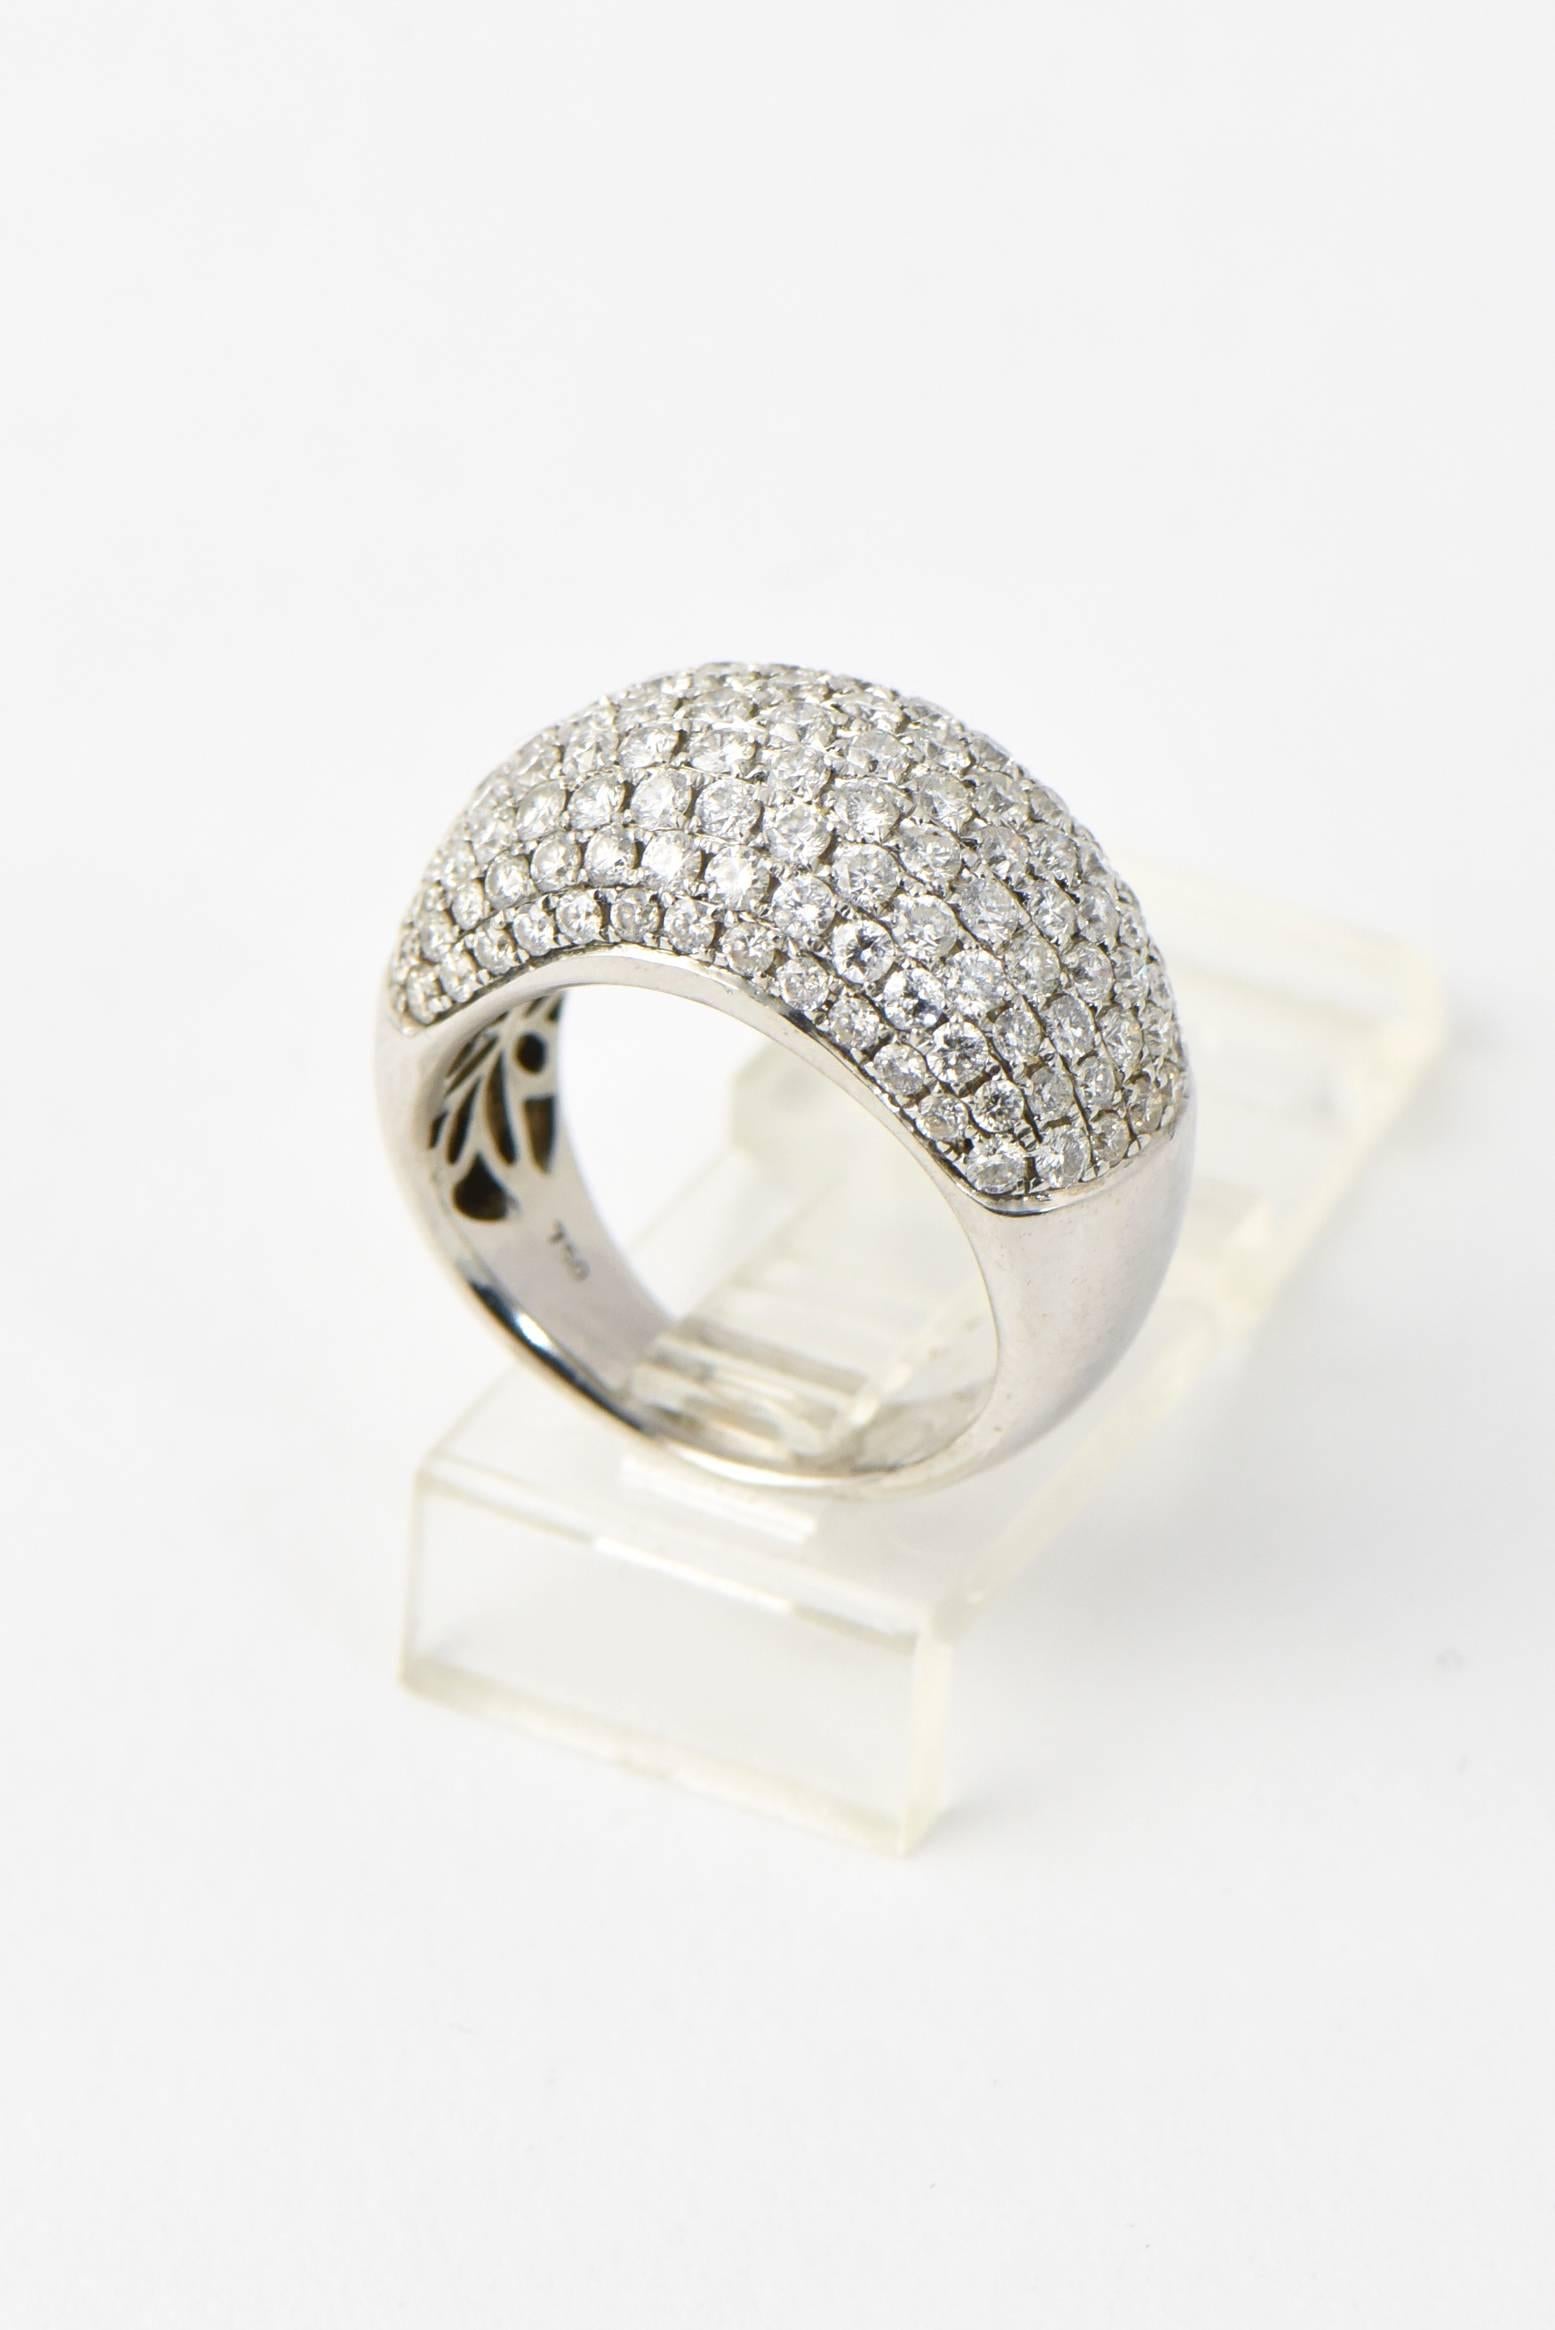 Fine 18k white gold bombe dome ring with pave melee white round brilliant cut diamonds featuring an approximate total carat weight of 3.75 ct.

US size 5 3/4-6 - it can be sized a little bit.